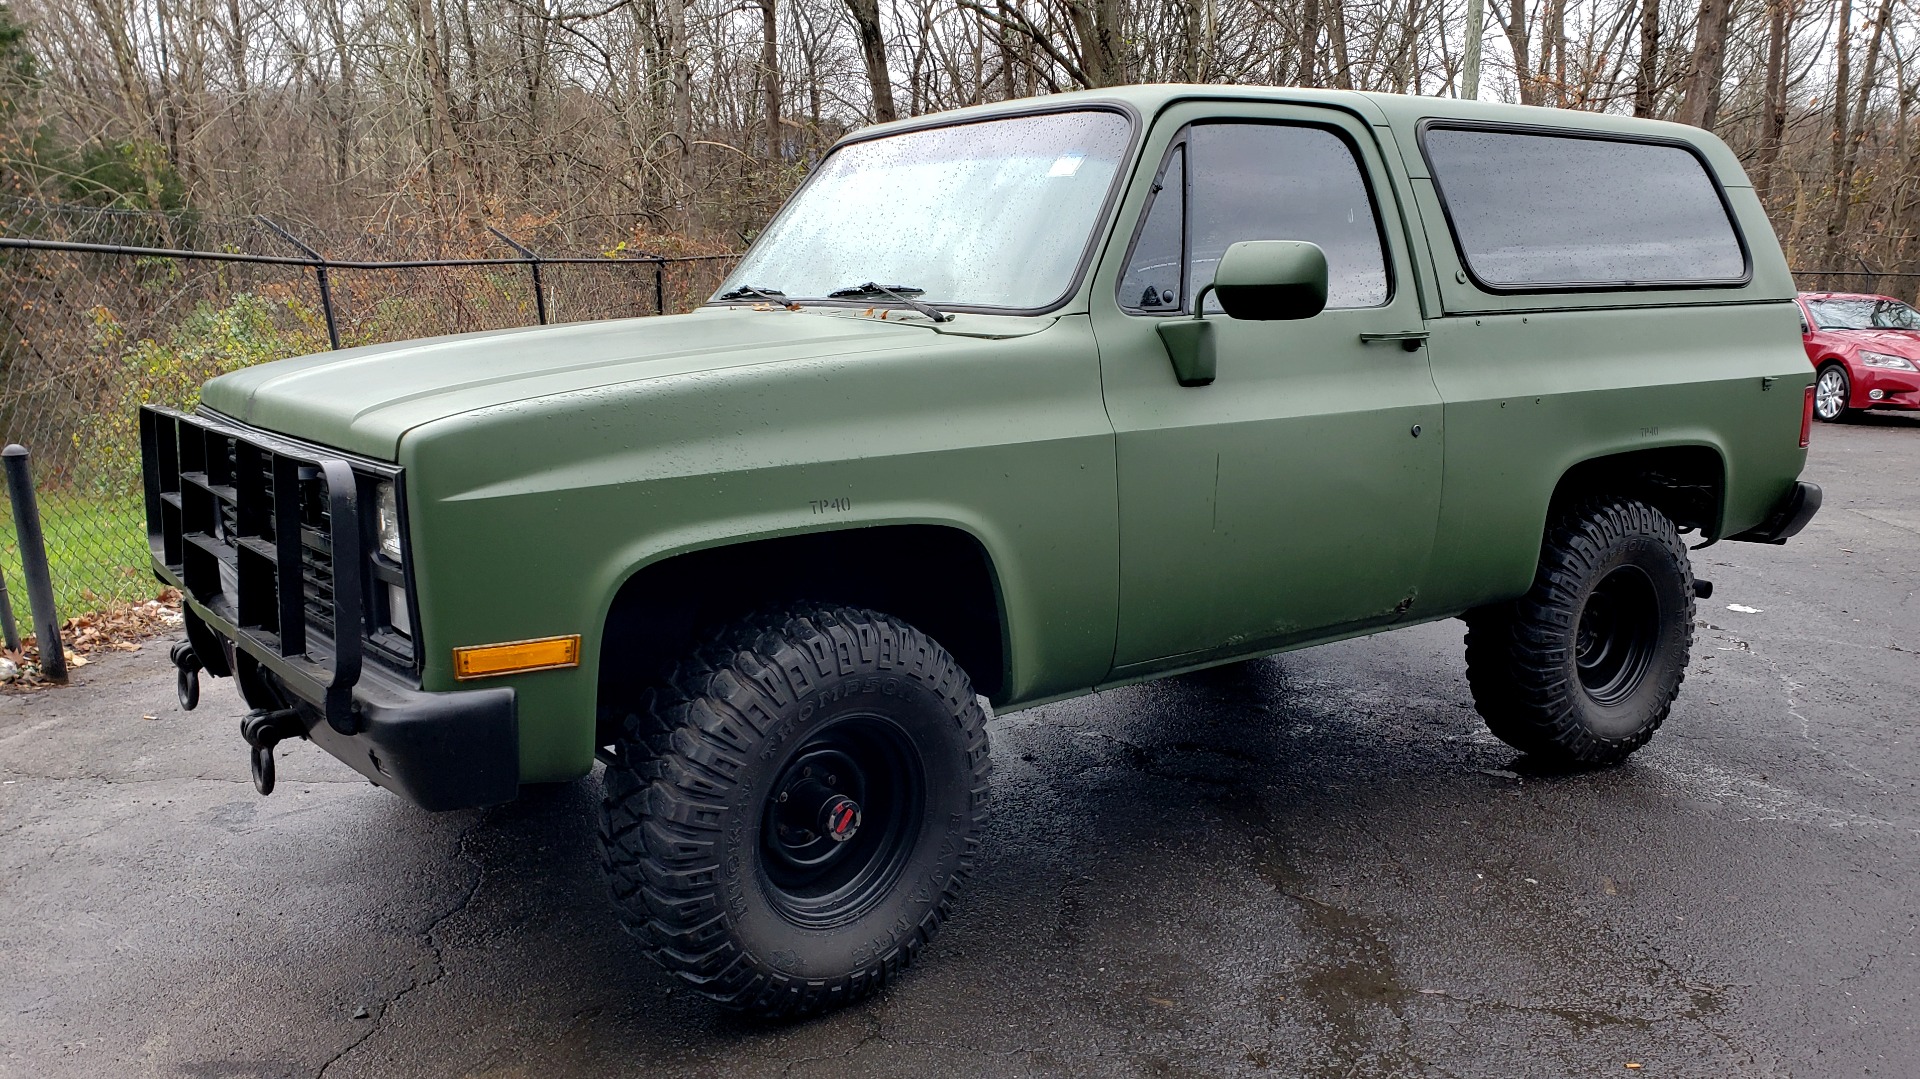 Used 1985 Chevrolet BLAZER D10 MILITARY SUV / 4X4 / 6.2L DIESEL V8 / VINTAGE AIR for sale Sold at Formula Imports in Charlotte NC 28227 16